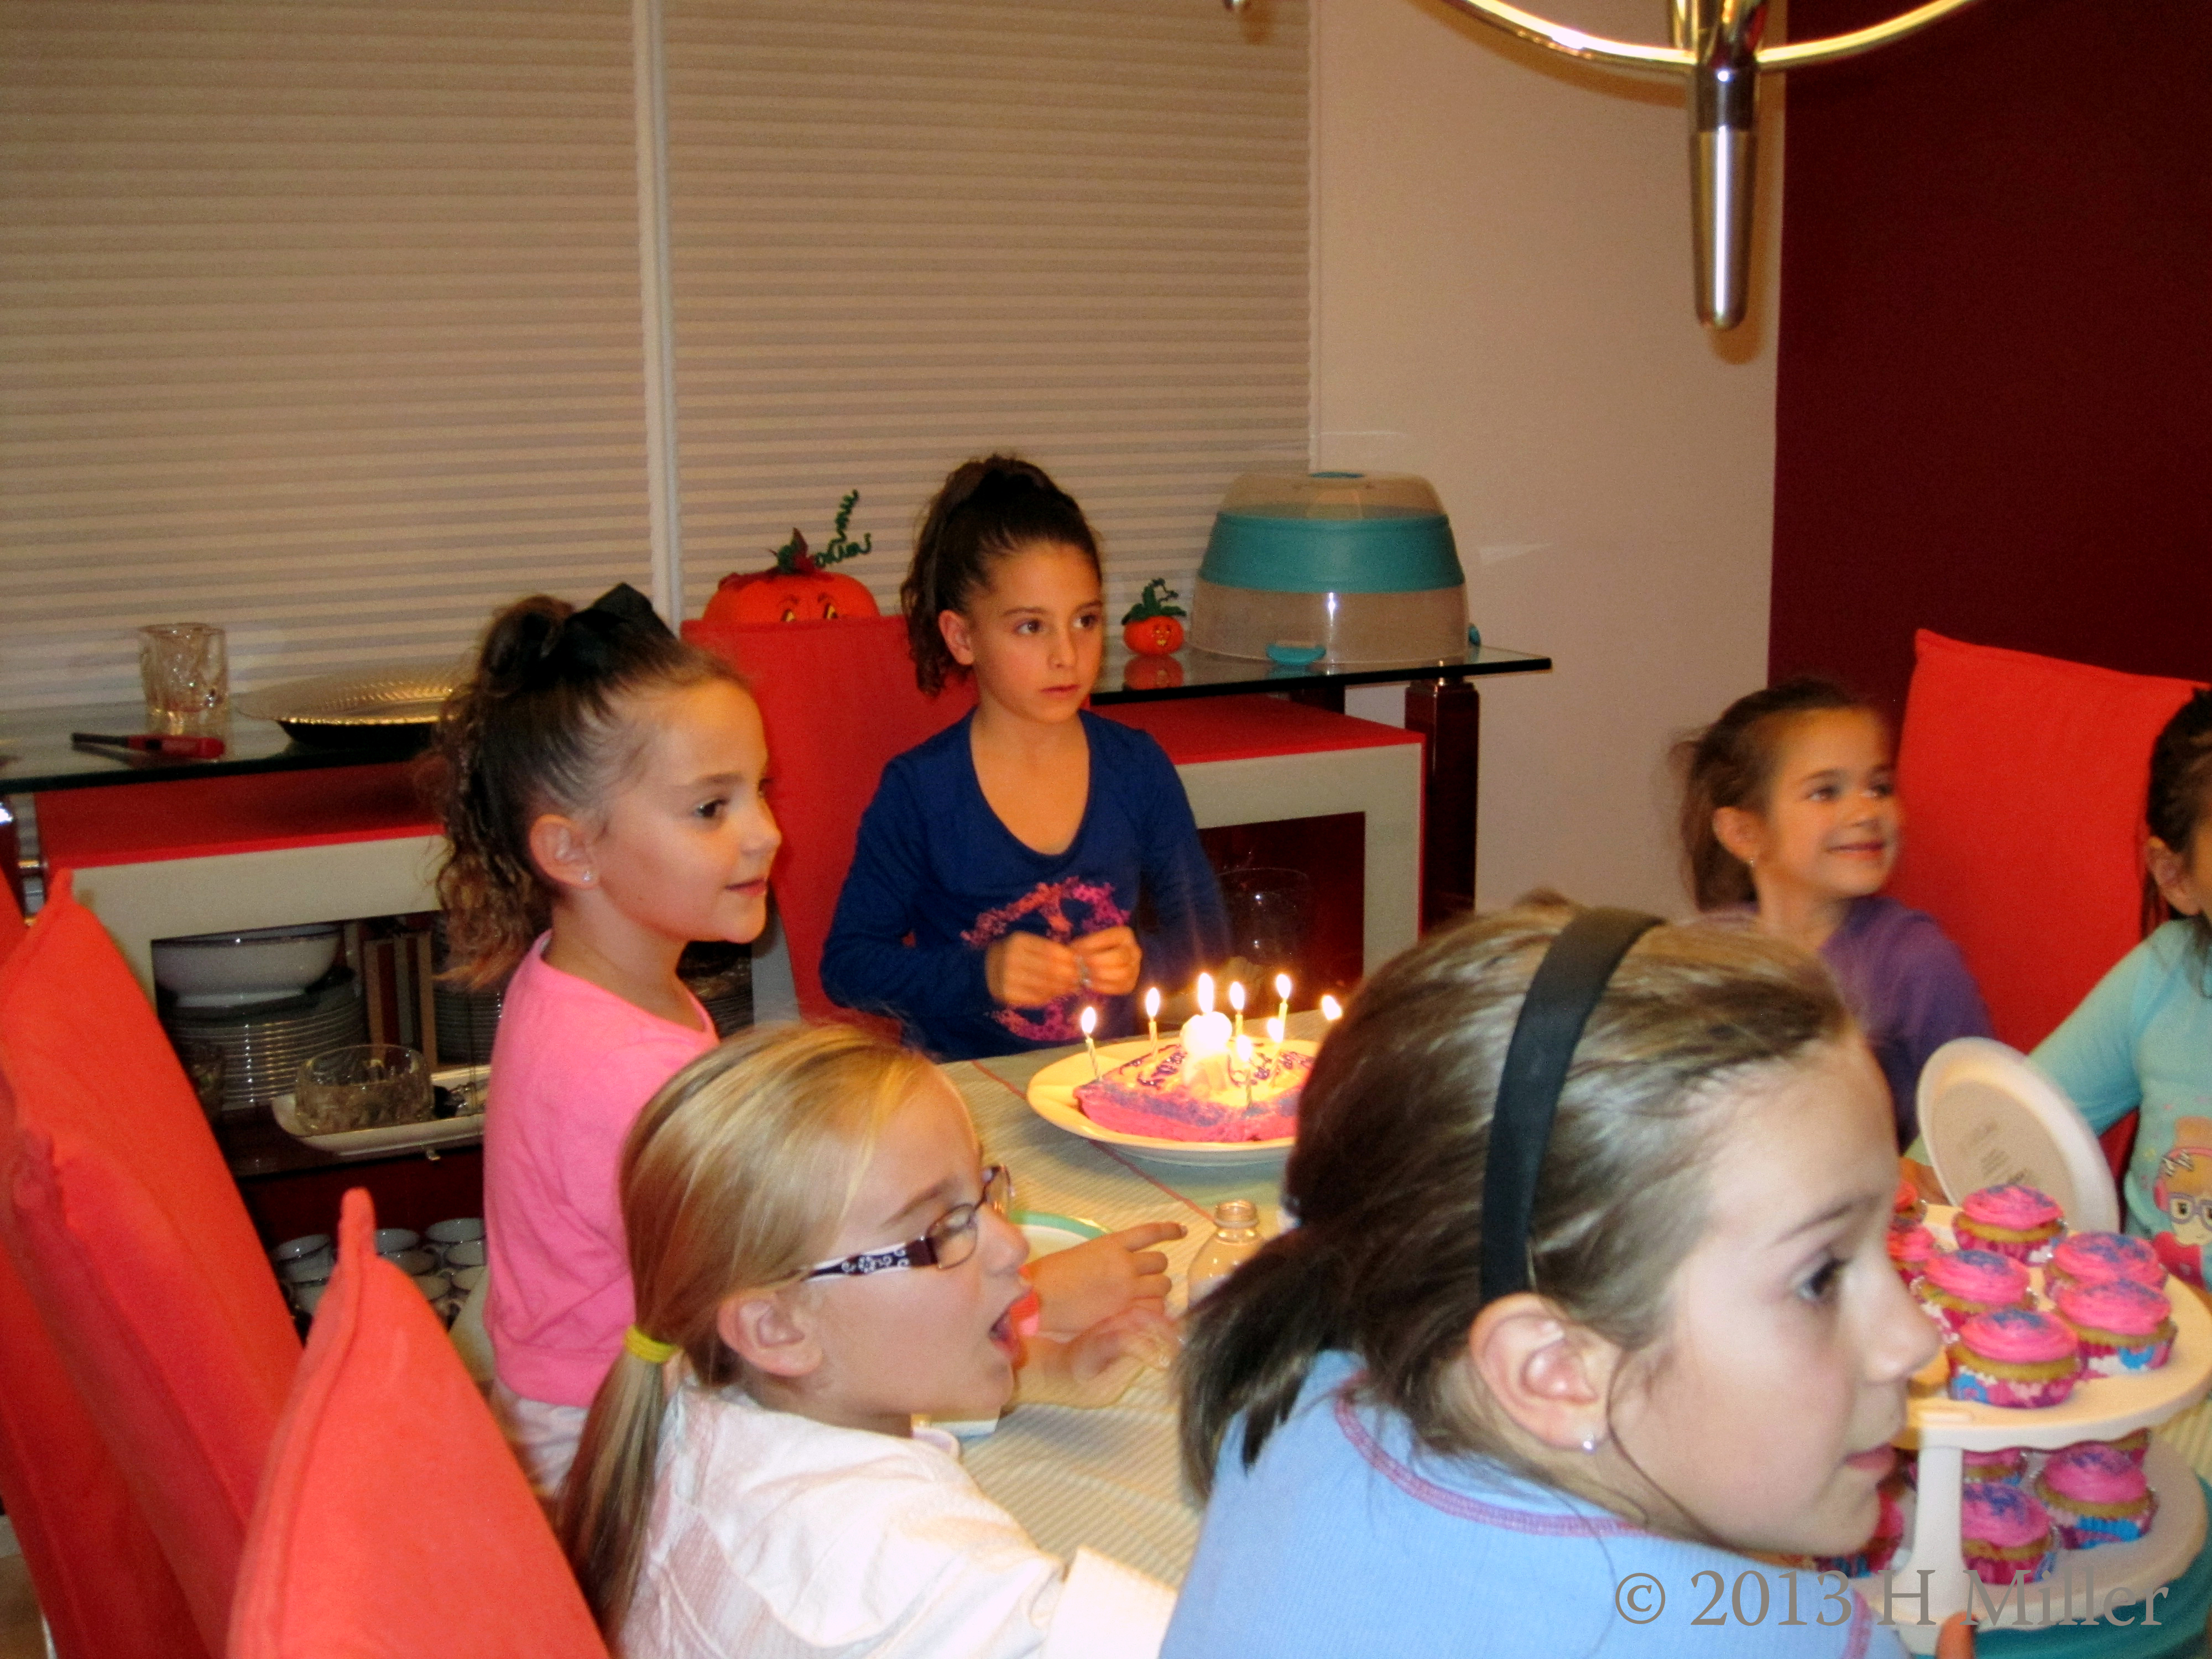 Posing For The Camera With The Lit Candles And Cake 